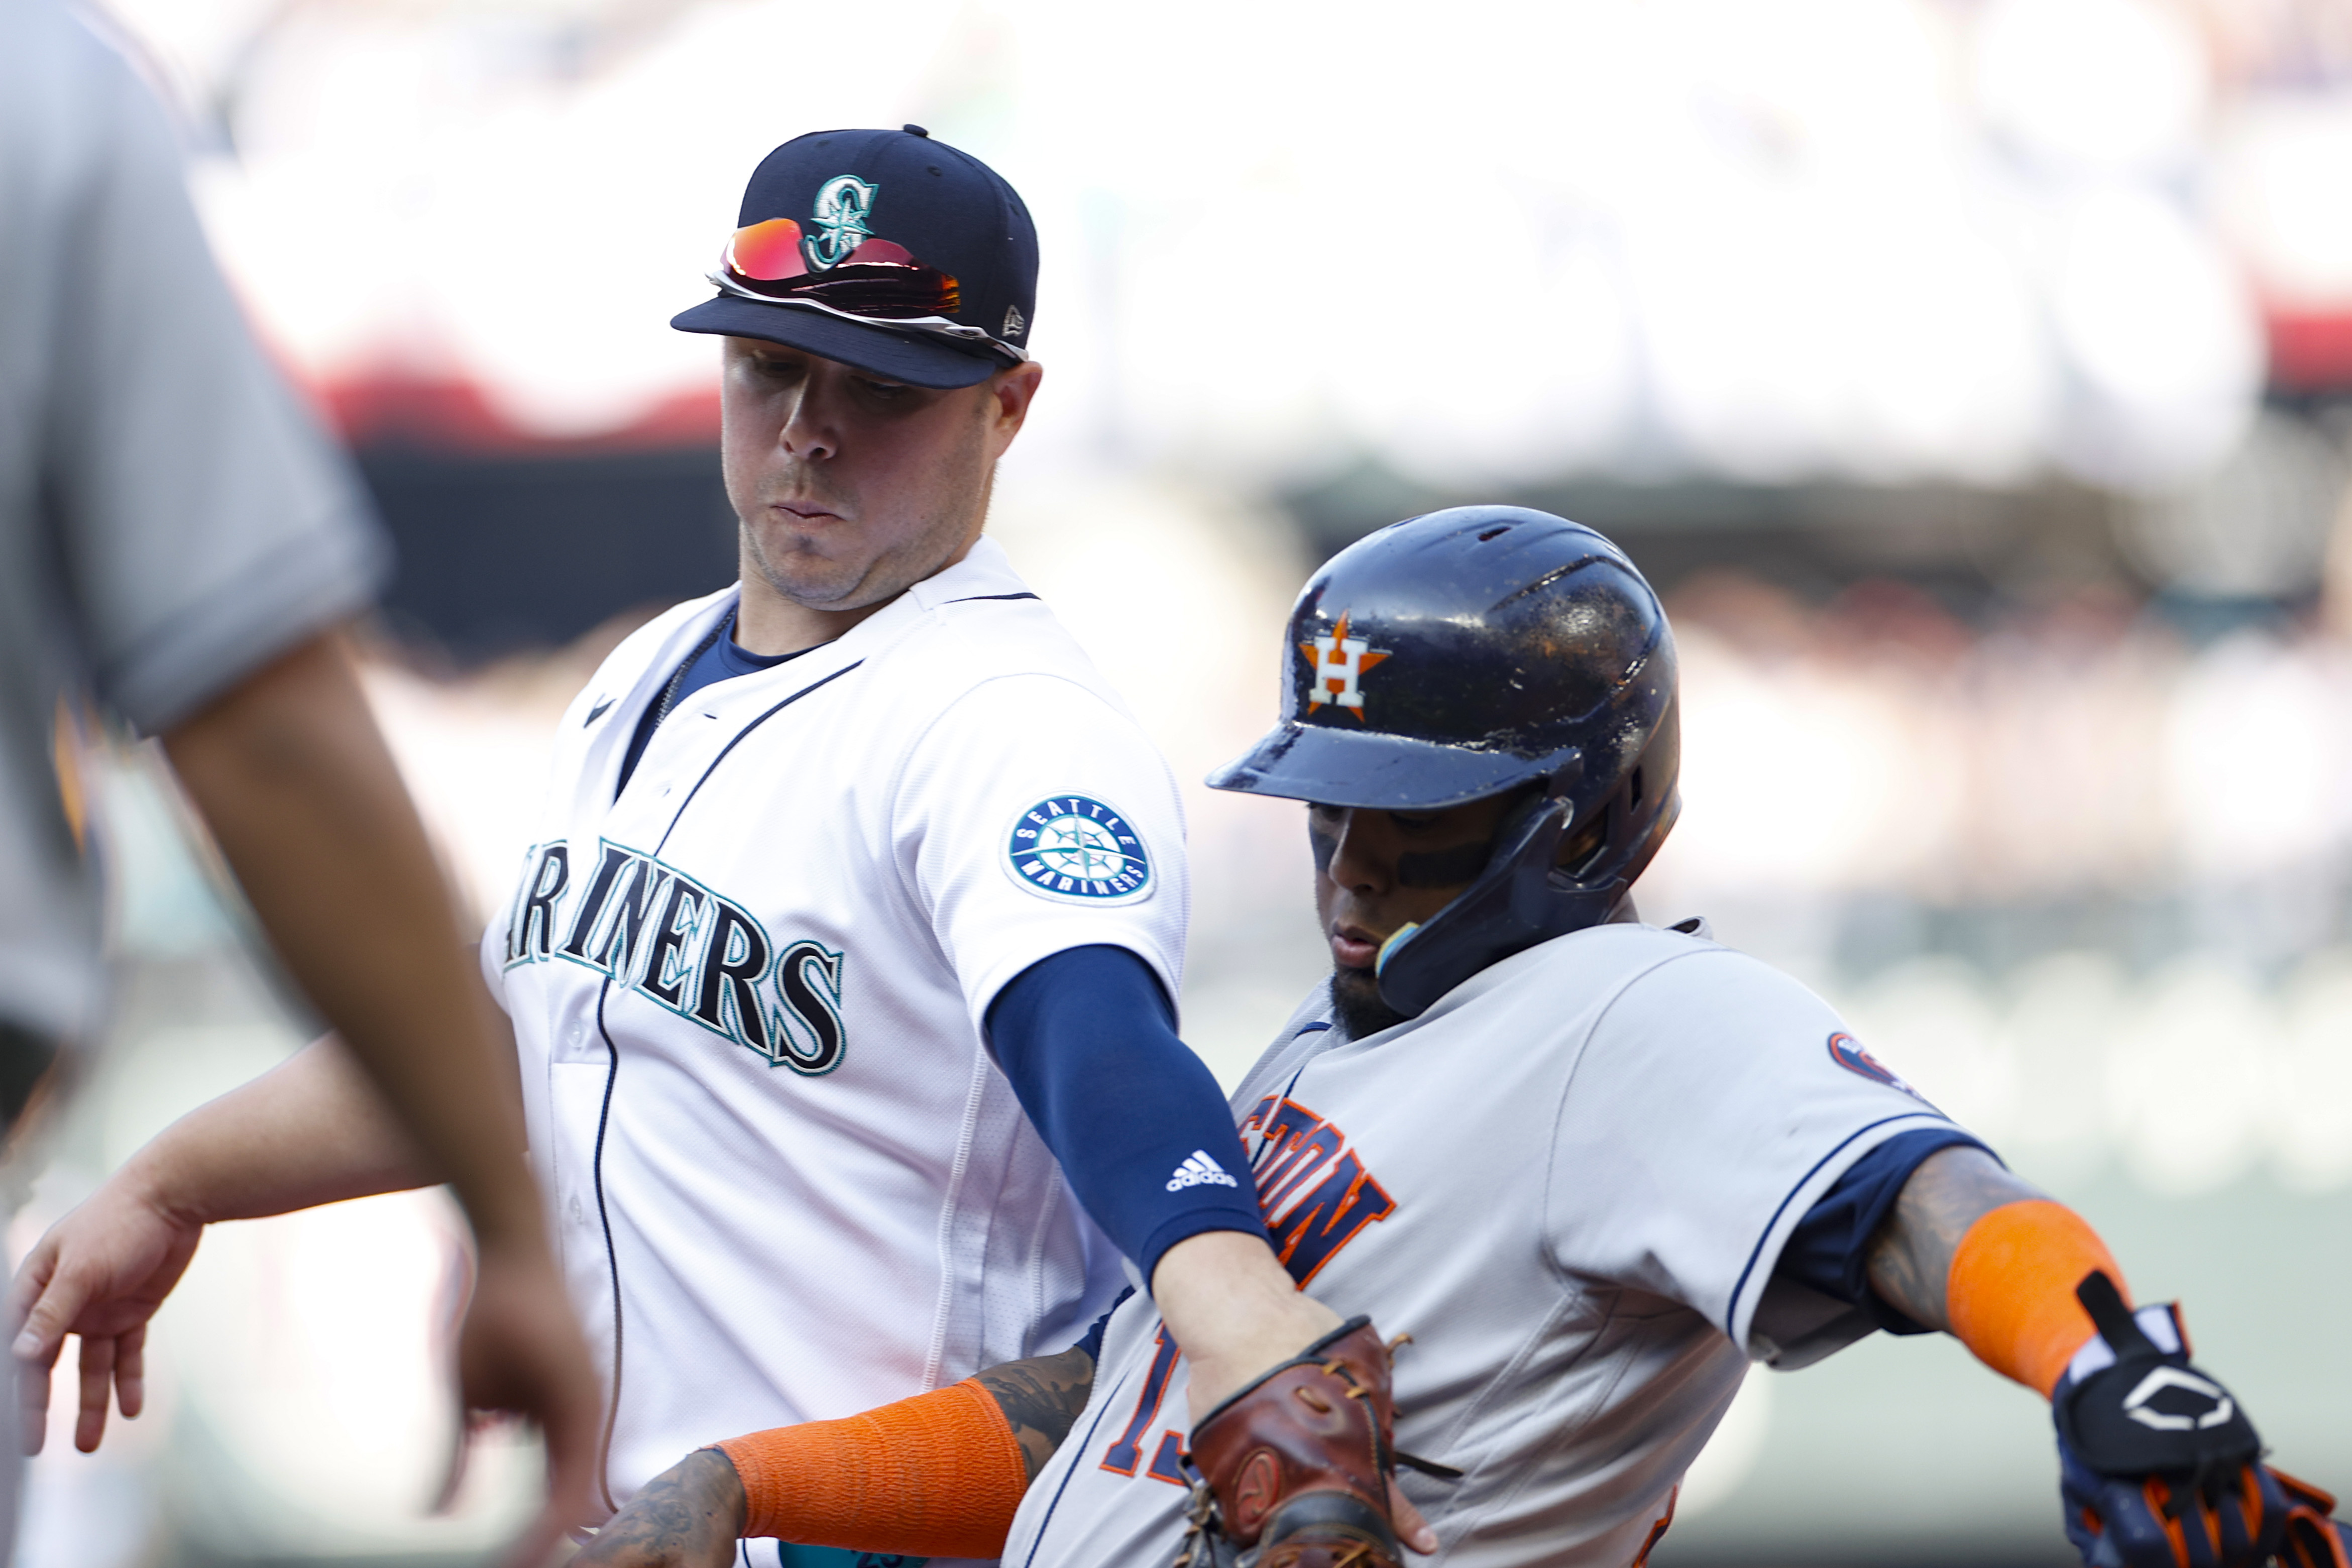 Division Series - Houston Astros v Seattle Mariners - Game Three